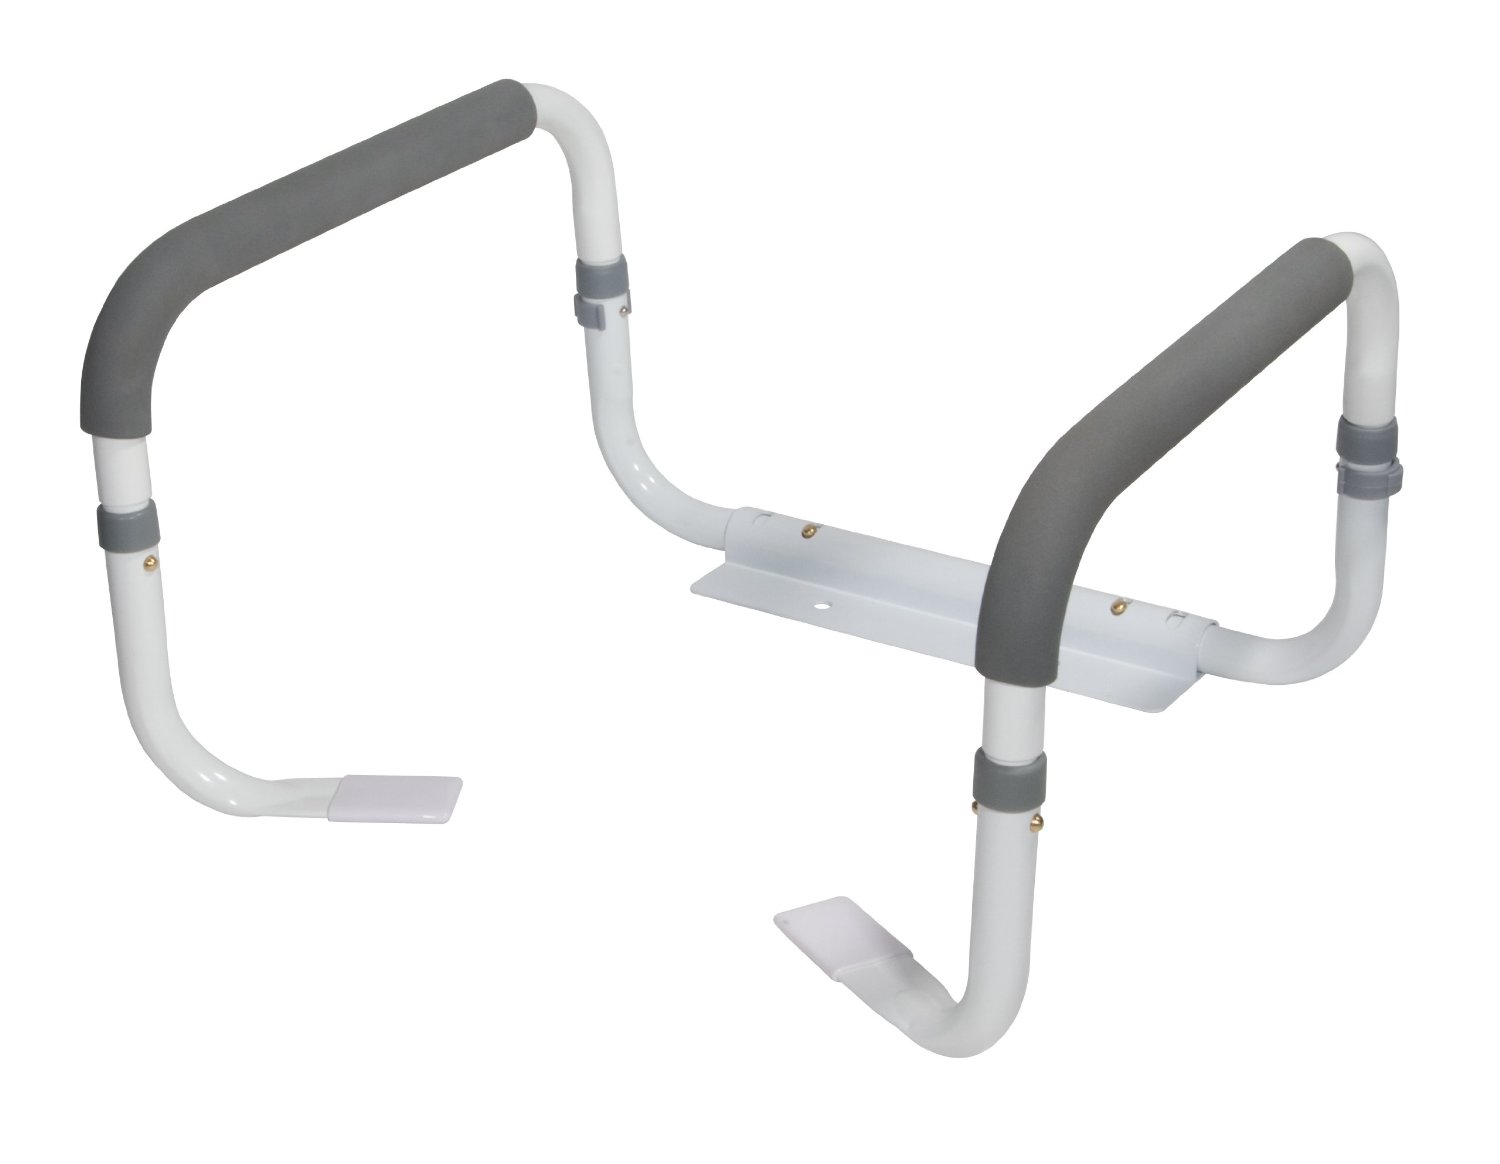 Medical Toilet Seat Rail handles for safety